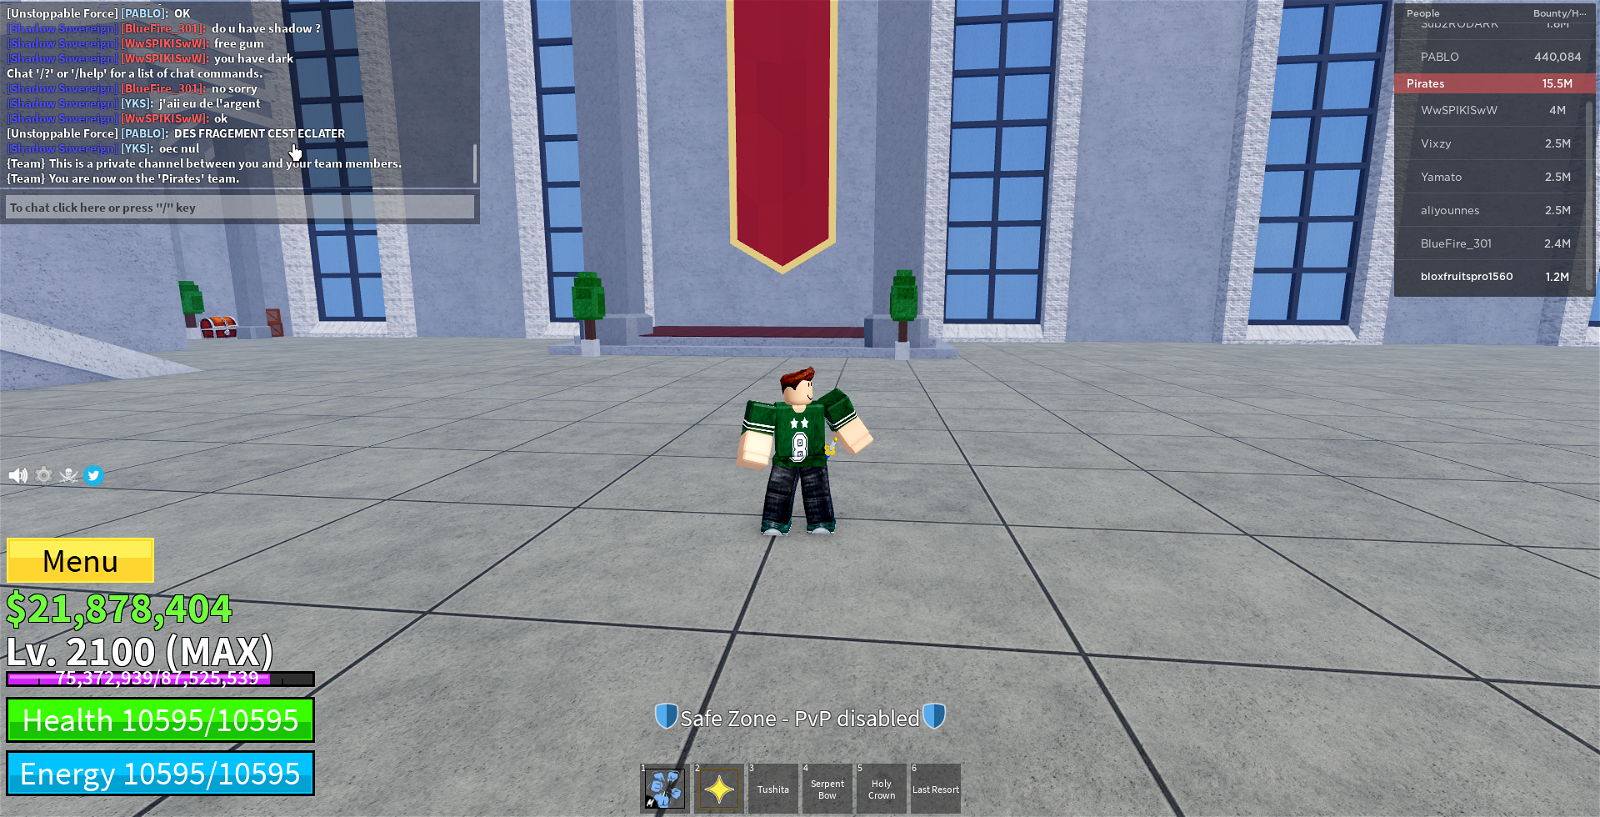 SOLD - Sell Account Blox Fruit (Roblox) - EpicNPC